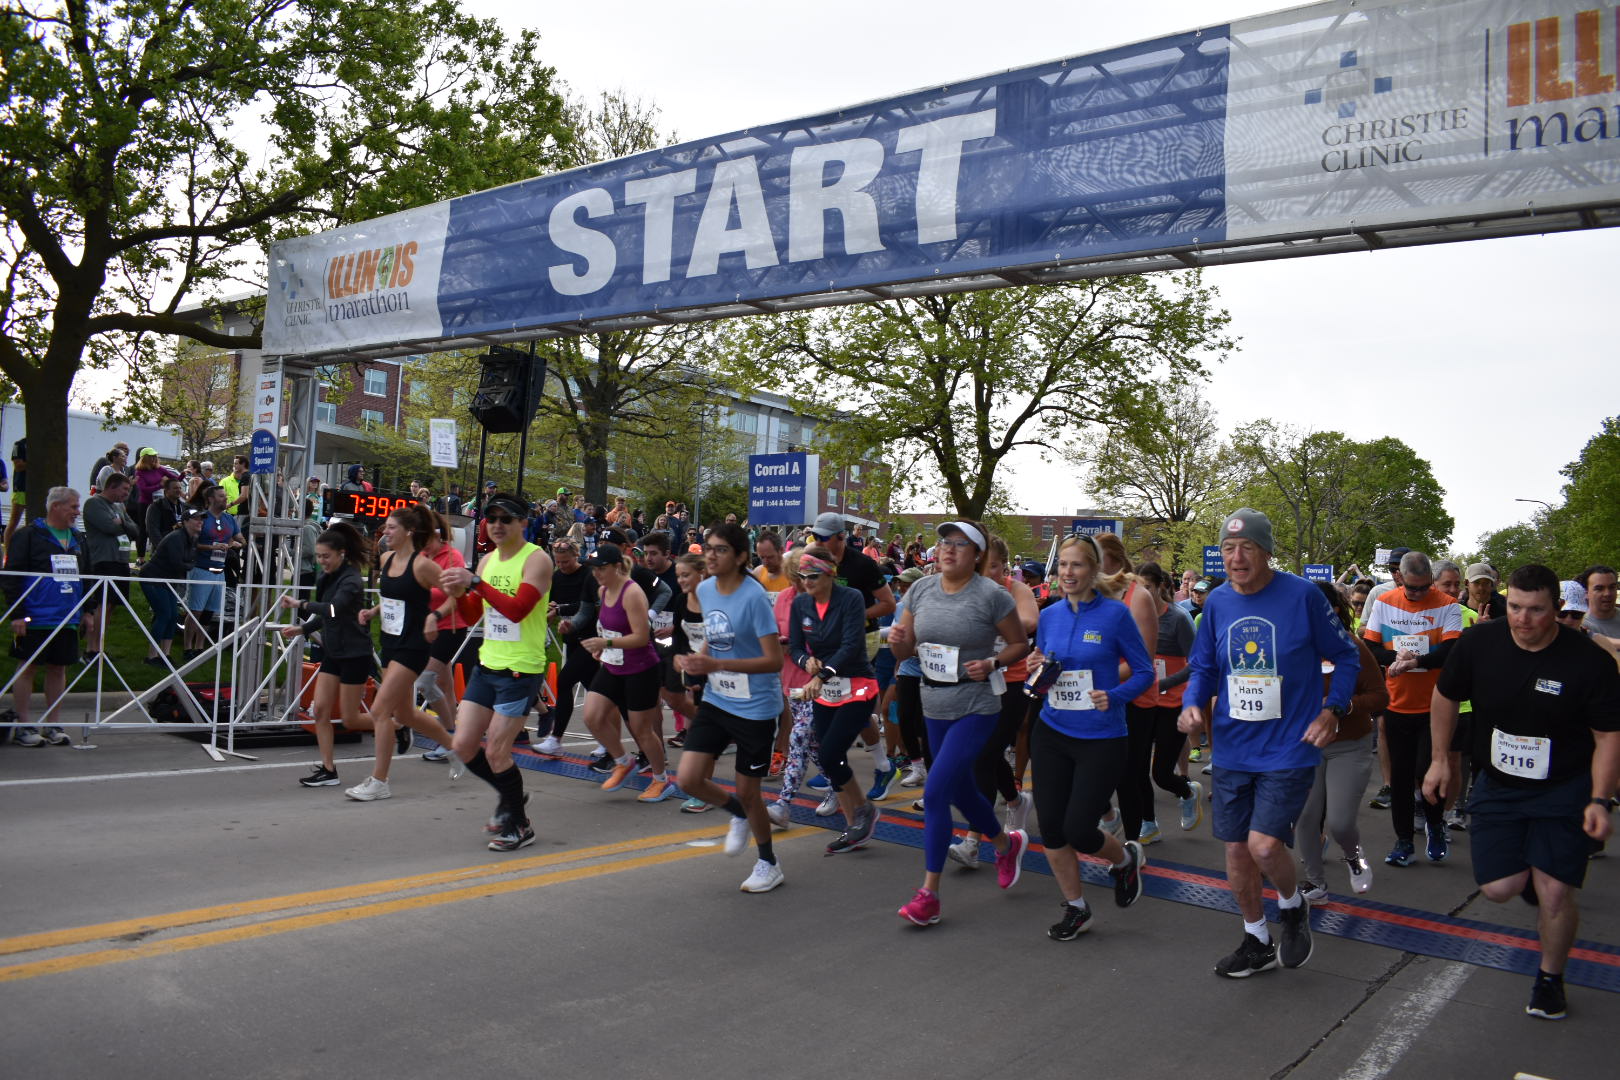 2023 Christie Clinic Illinois Race Weekend “Ran This Town” With